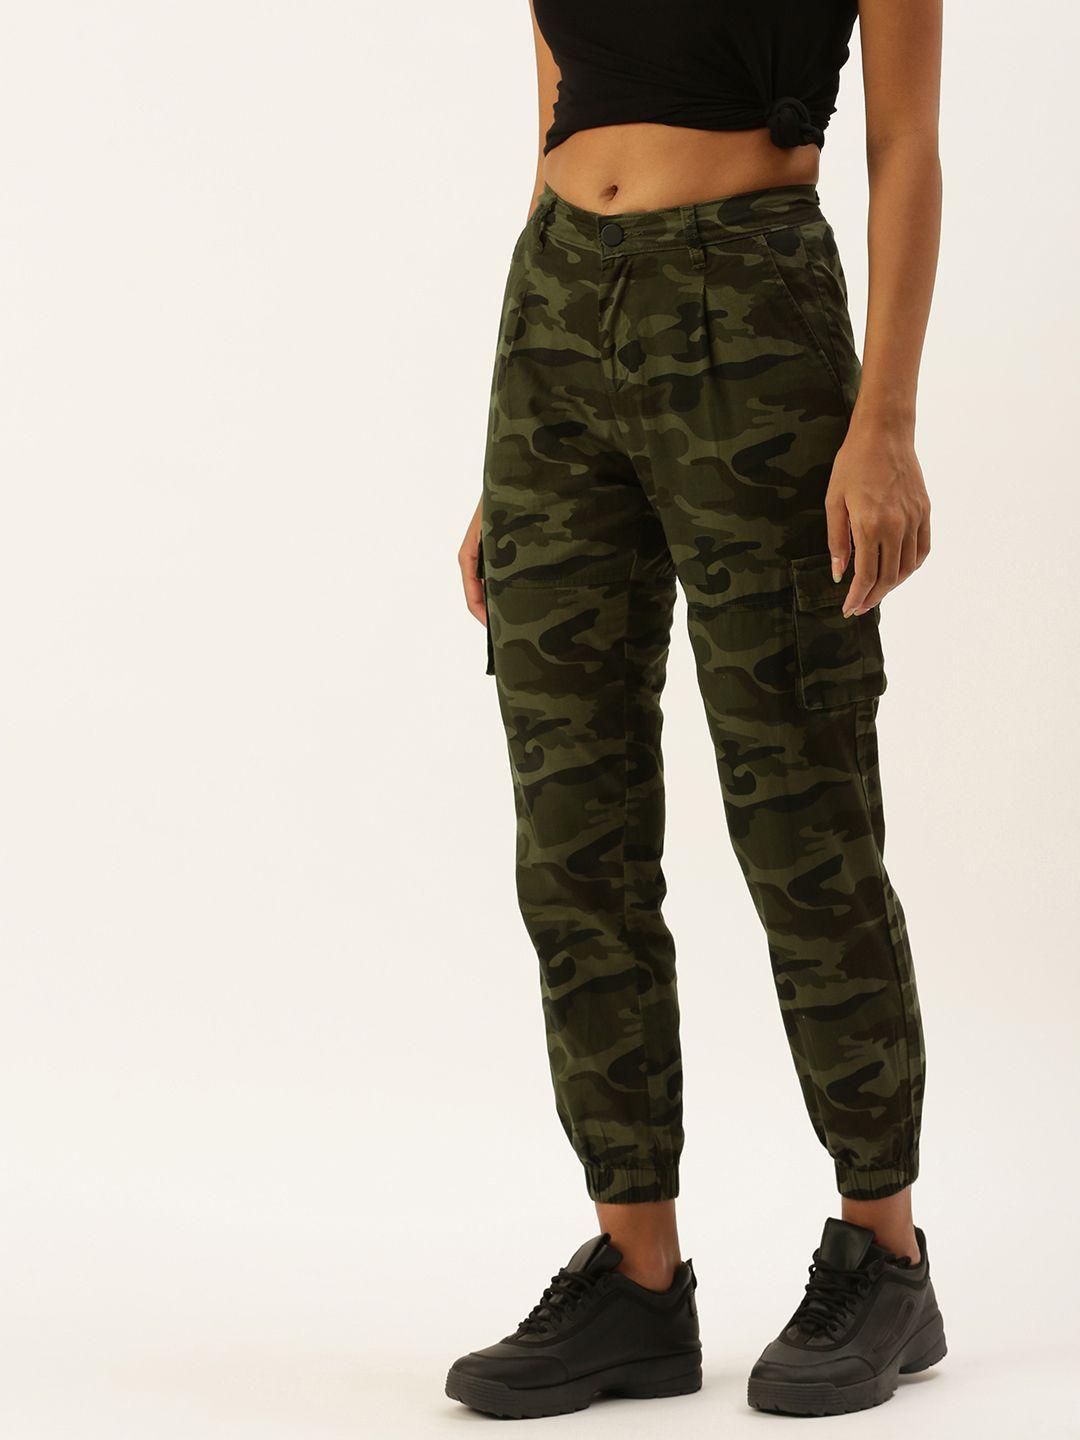 ivoc-women-olive-green-camouflage-printed-joggers